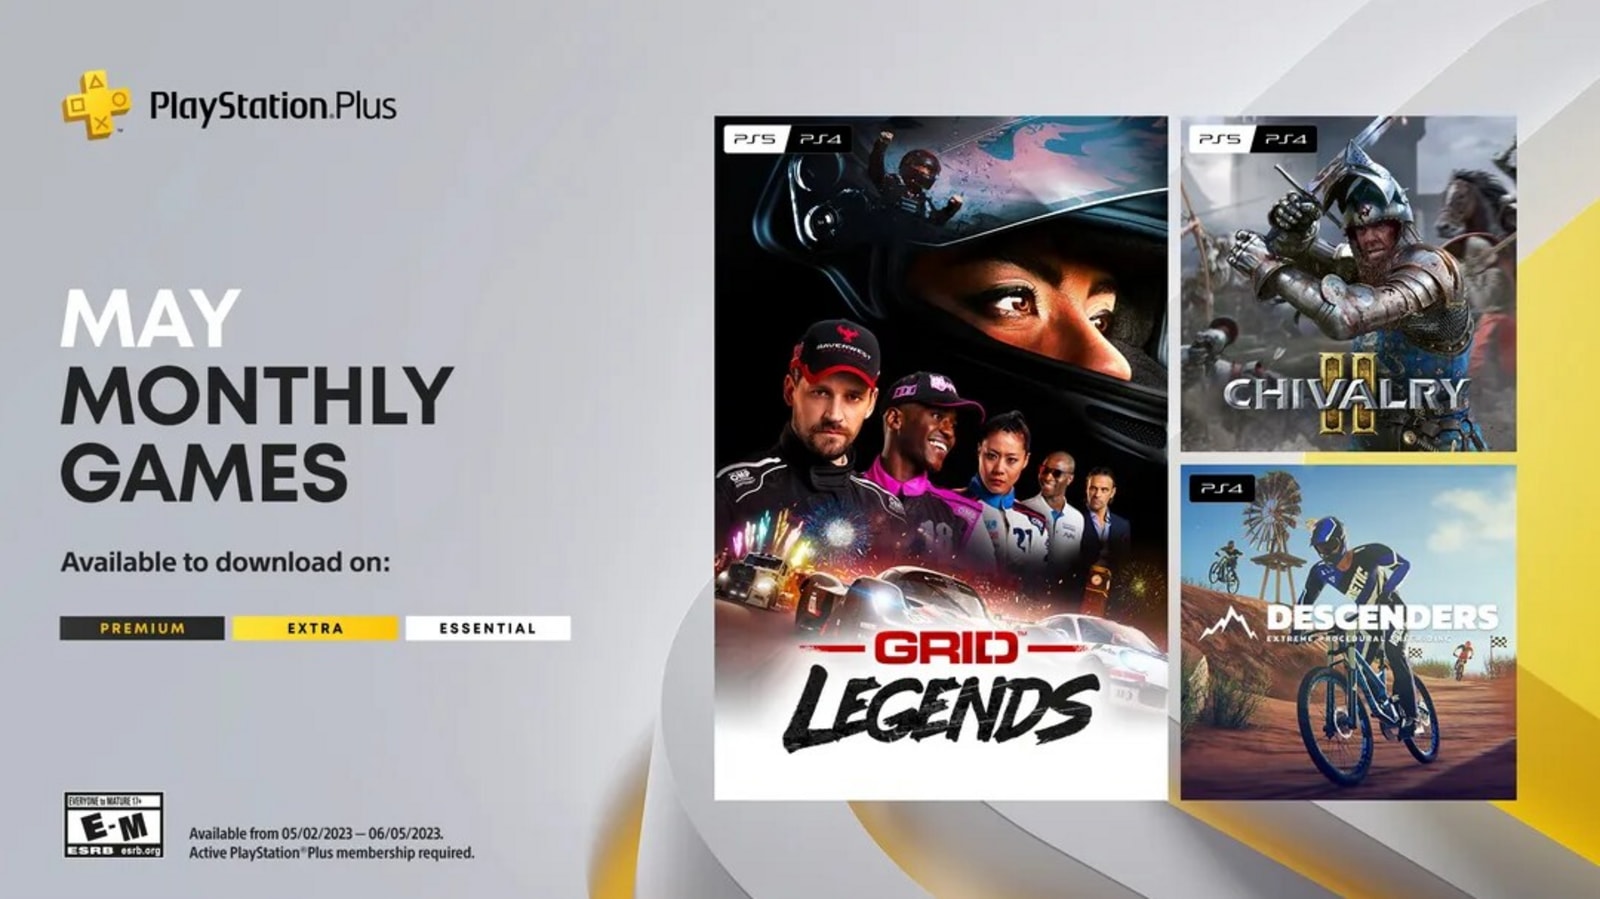 PlayStation Plus May 2023 Games GRID Legends, Chivalry 2, more for